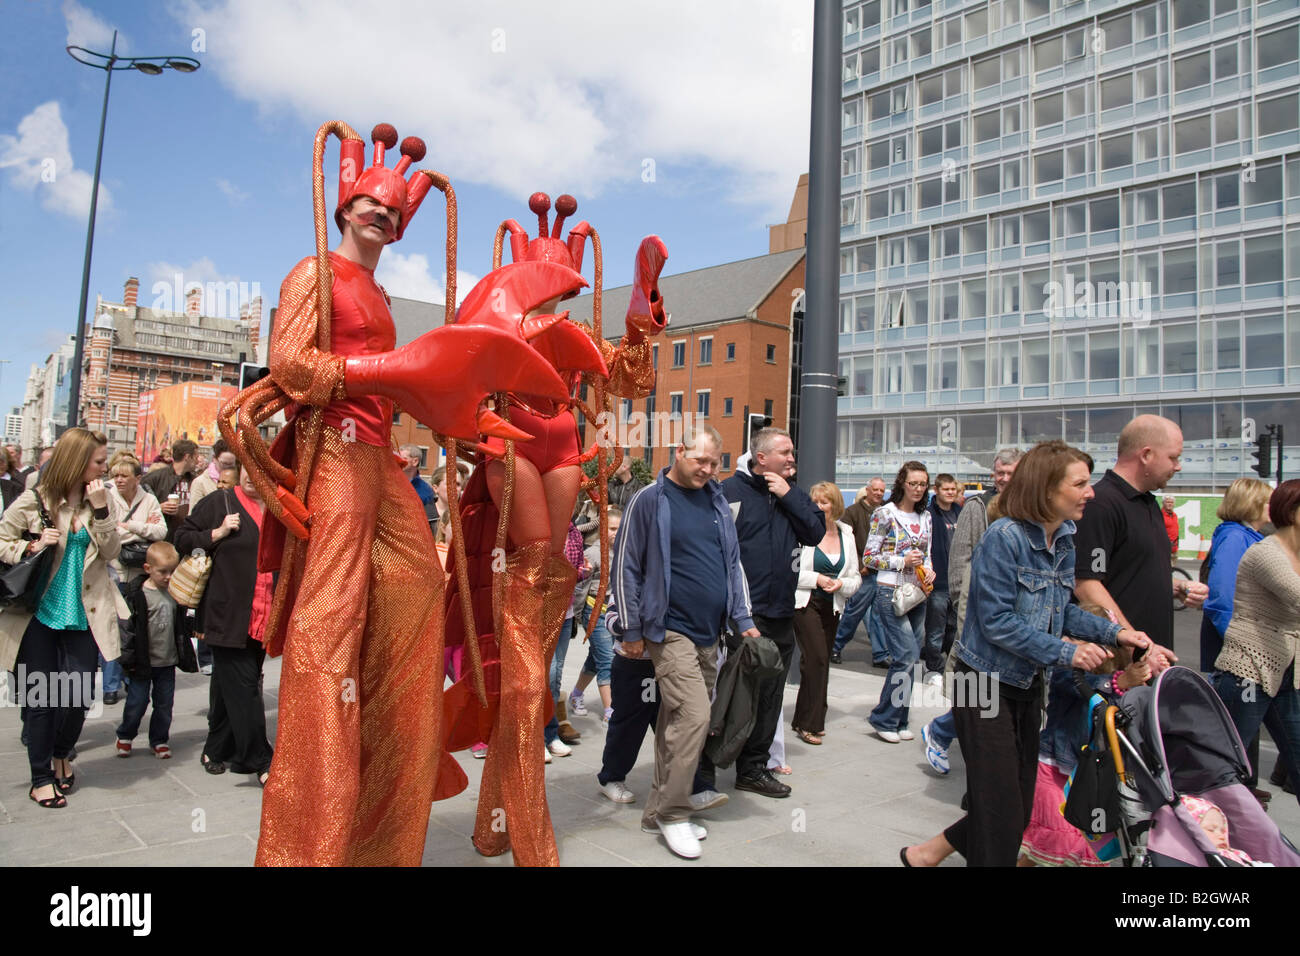 Liverpool Merseyside England UK July A man and woman walking on stilts dressed as crabs amongst the hurrying crowds Stock Photo